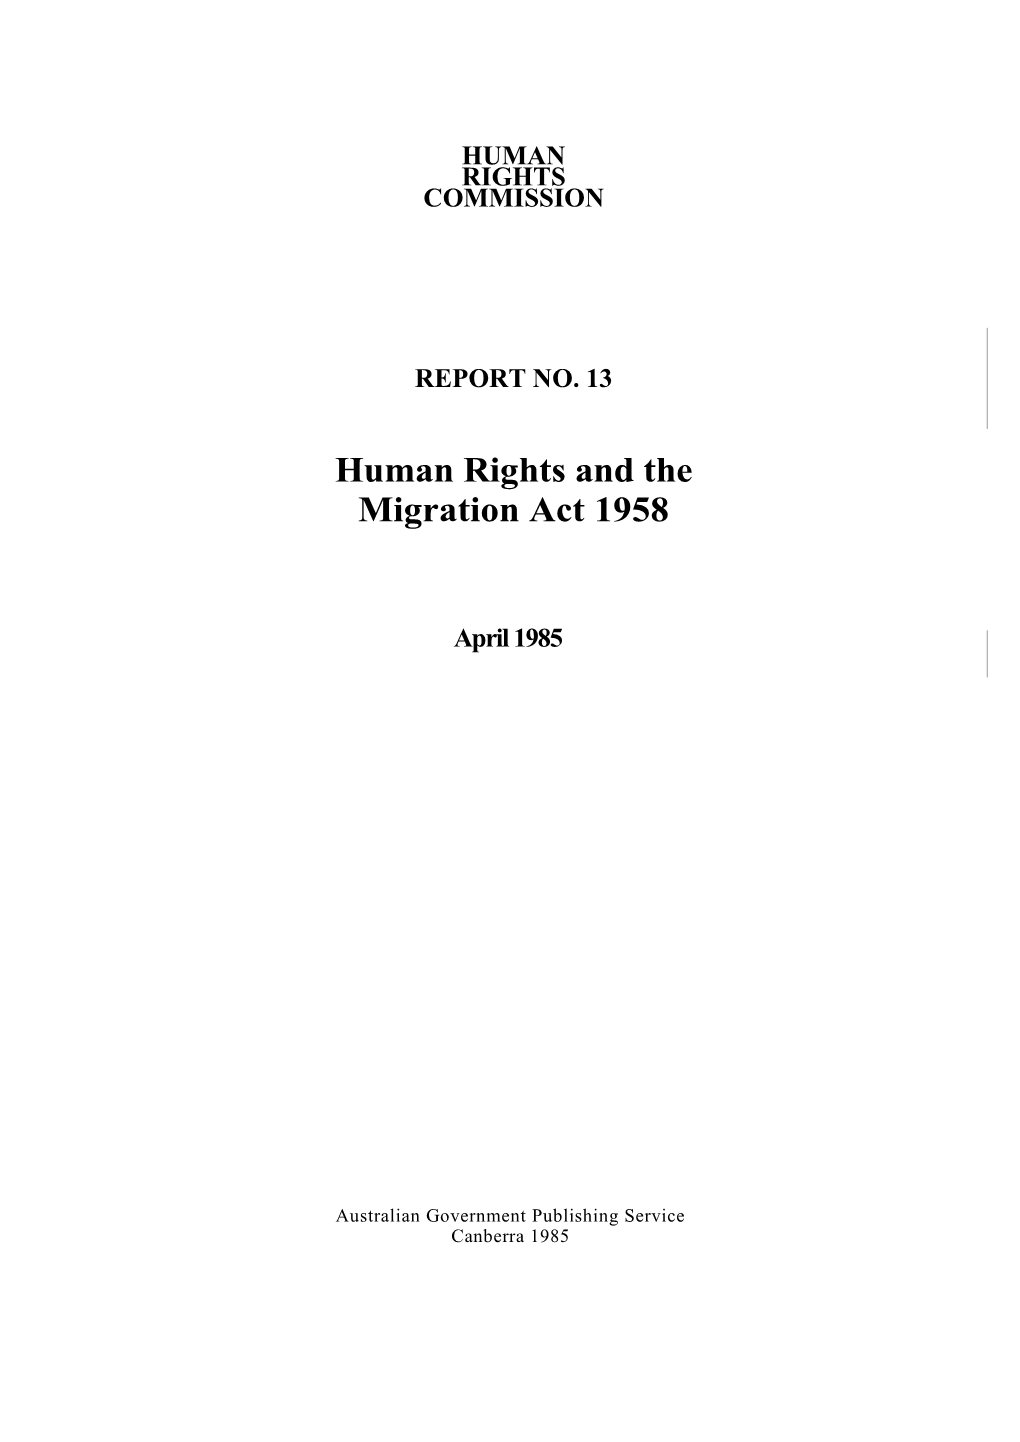 Human Rights and the Migration Act 1958